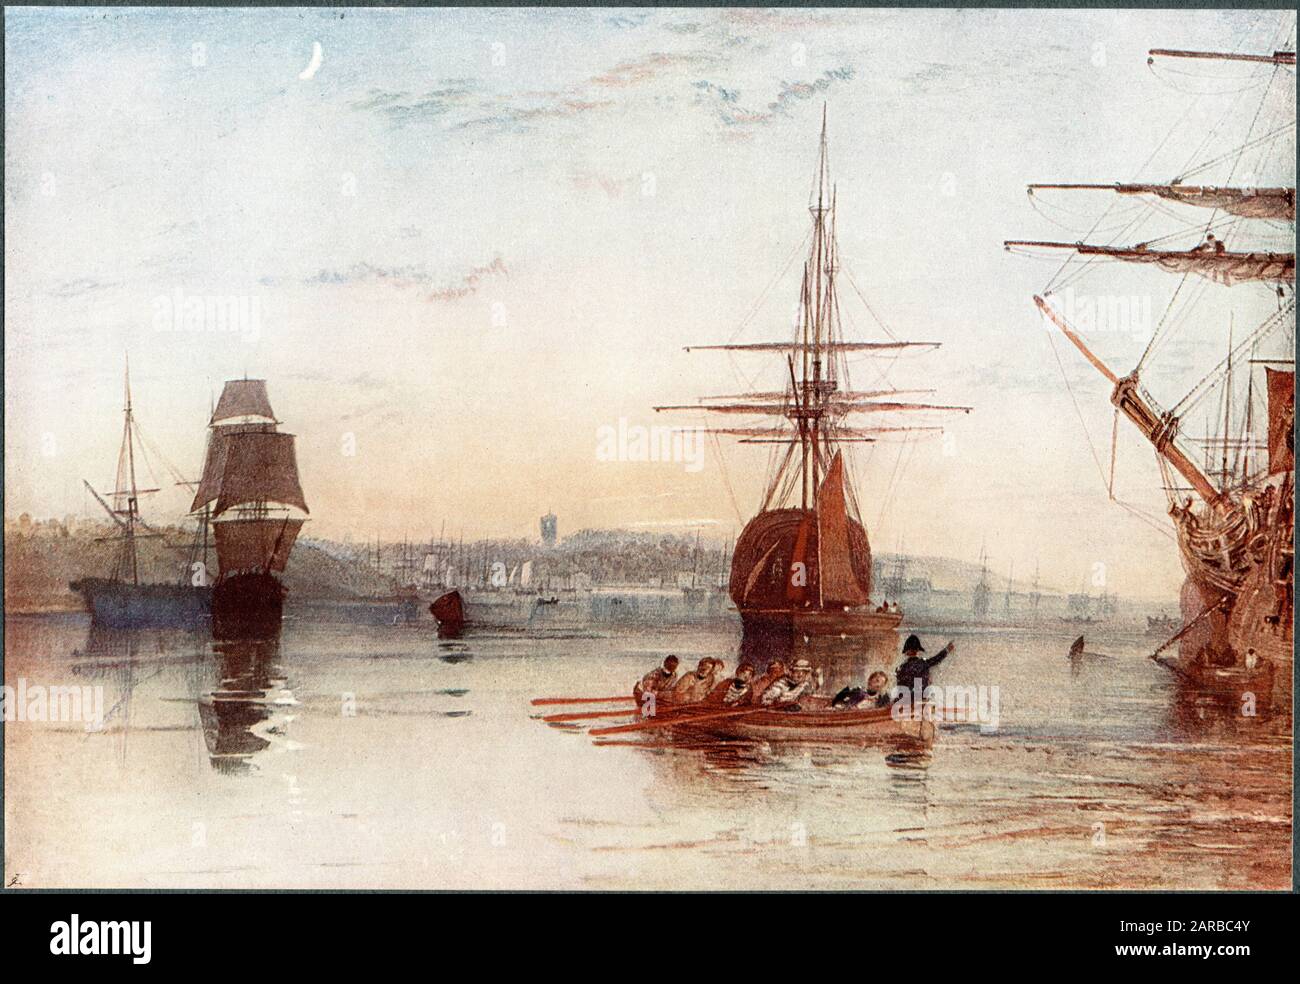 ISLE OF WIGHT/COWES 1830 Stockfoto